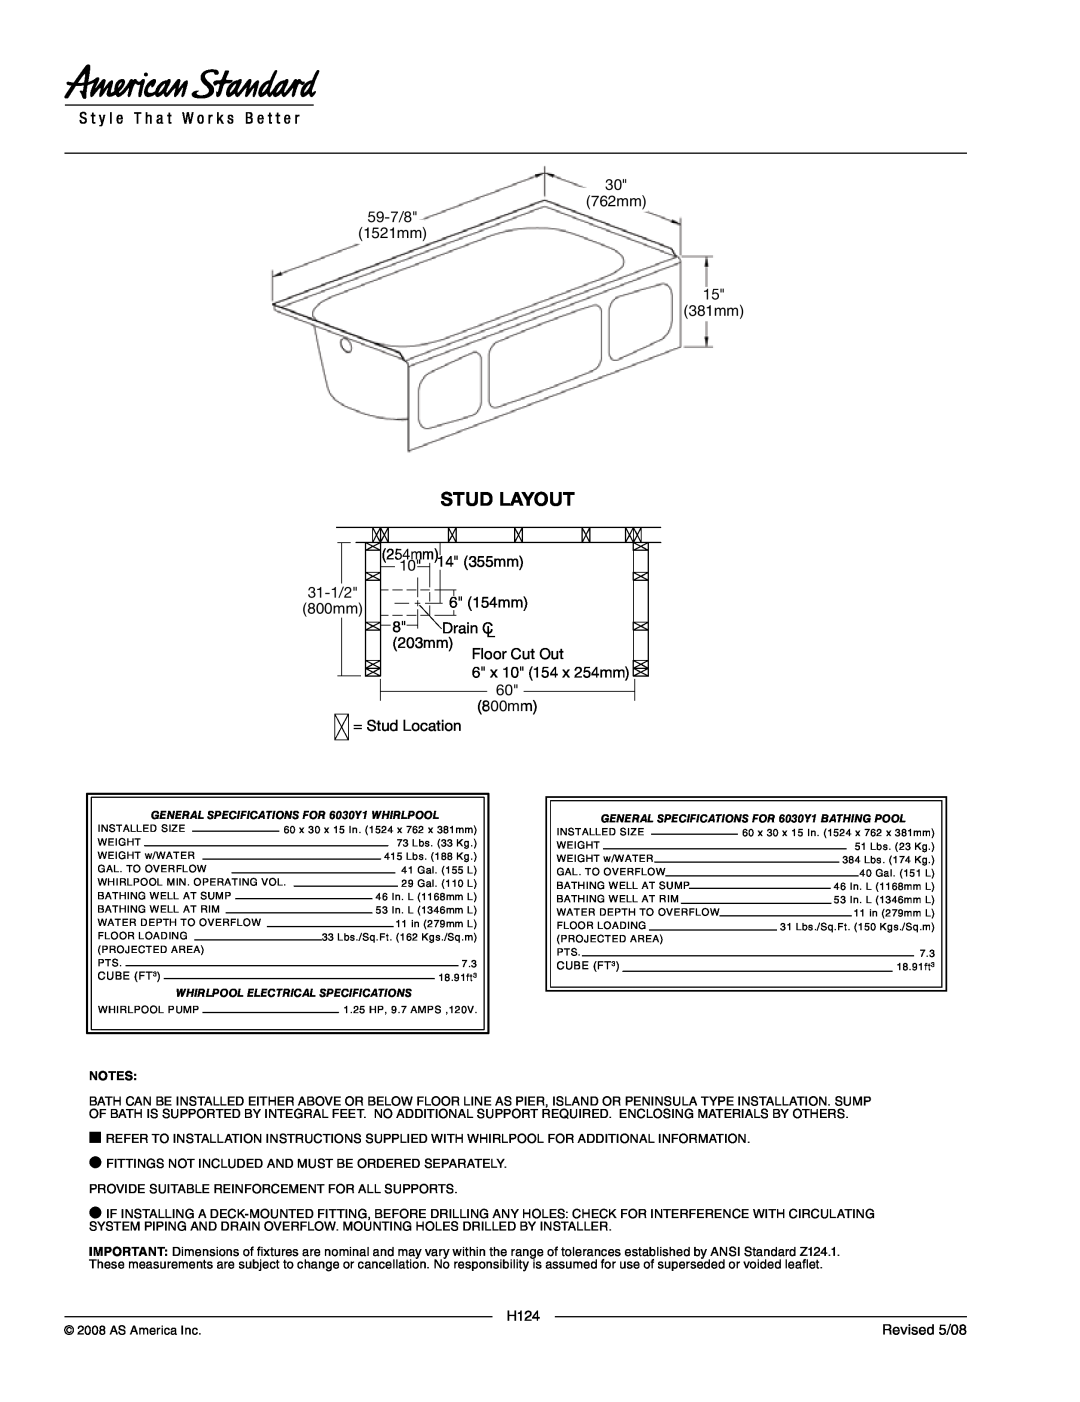 American Standard 6030Y1.202 Stud Layout, GENERAL SPECIFICATIONS FOR 6030Y1 WHIRLPOOL, Whirlpool Electrical Specifications 